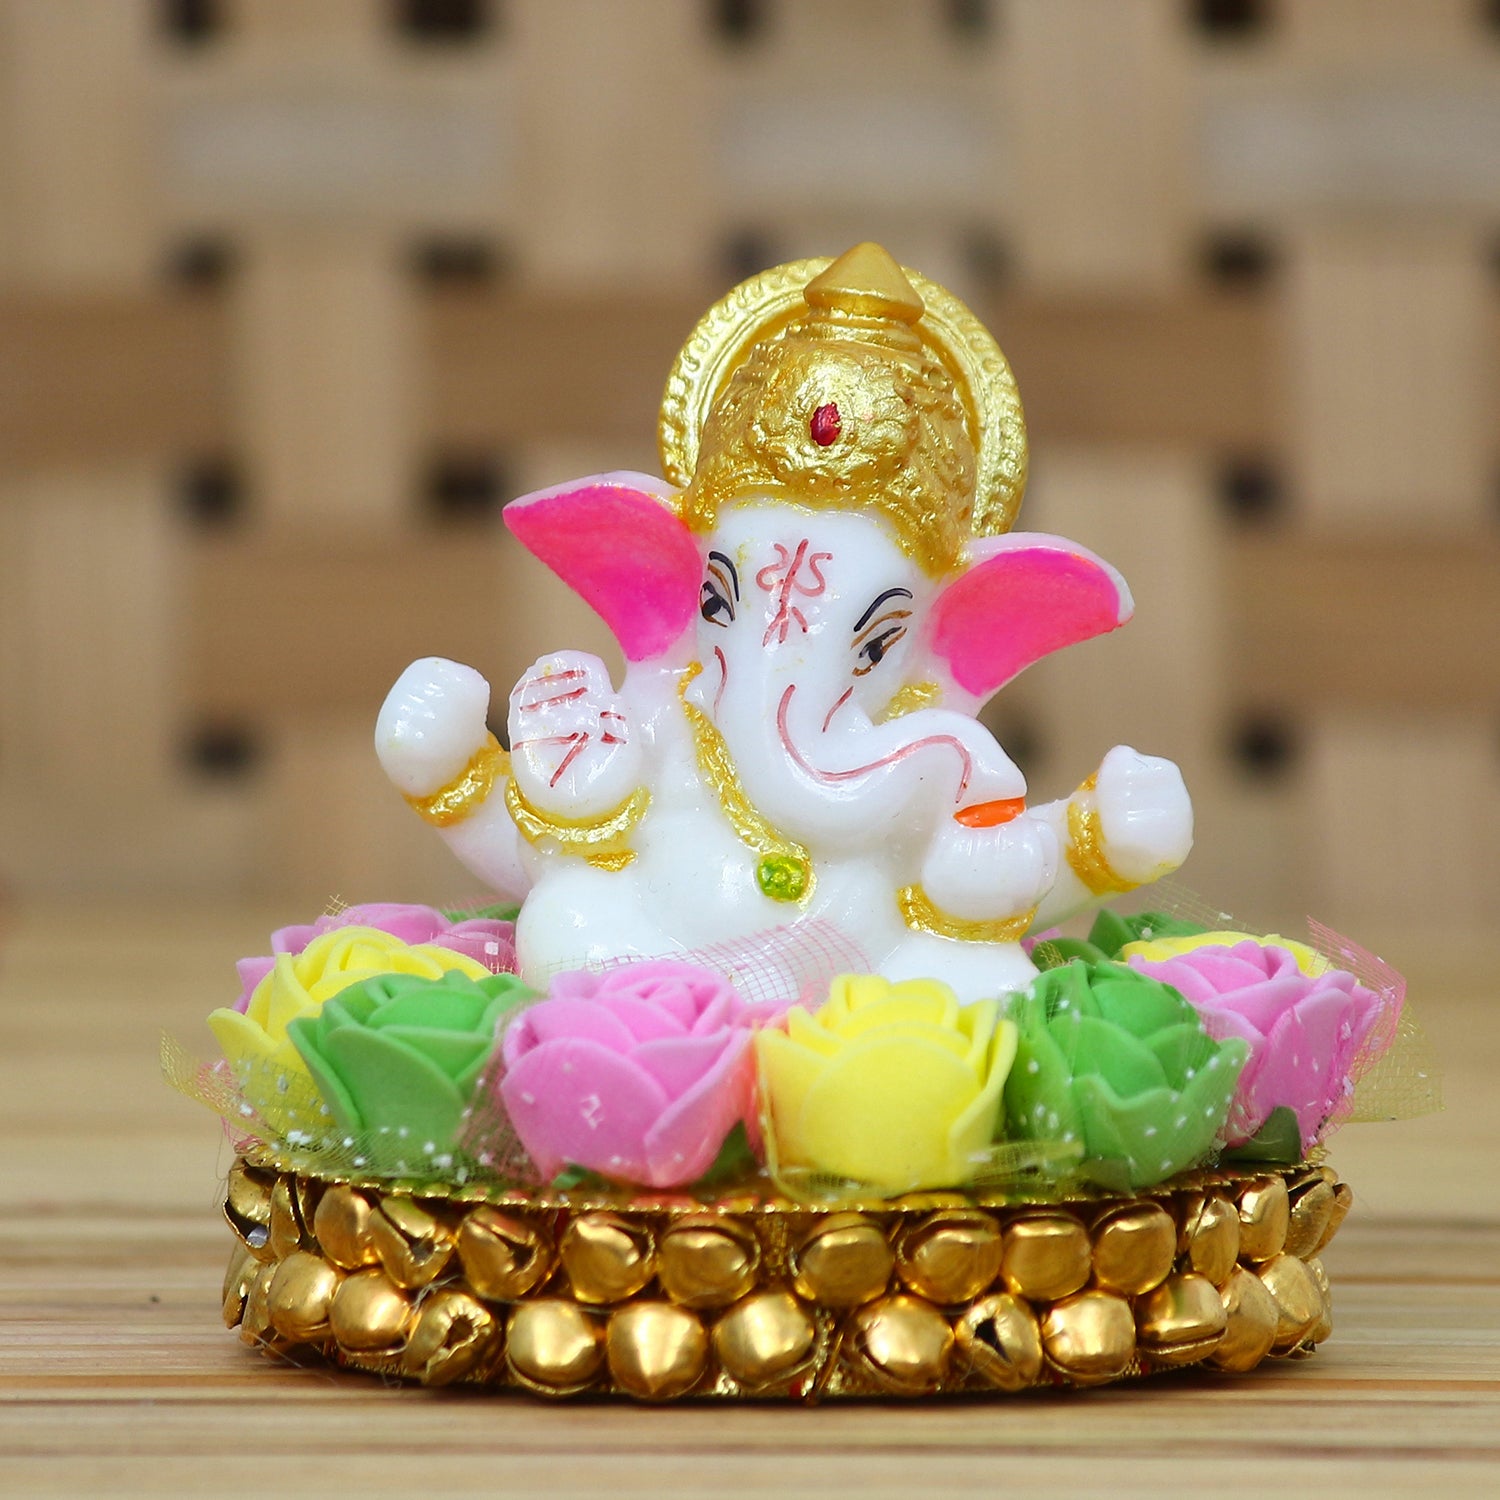 Polyresin Lord Ganesha Idol on Decorative Handcrafted Plate with Colorful Flowers 1